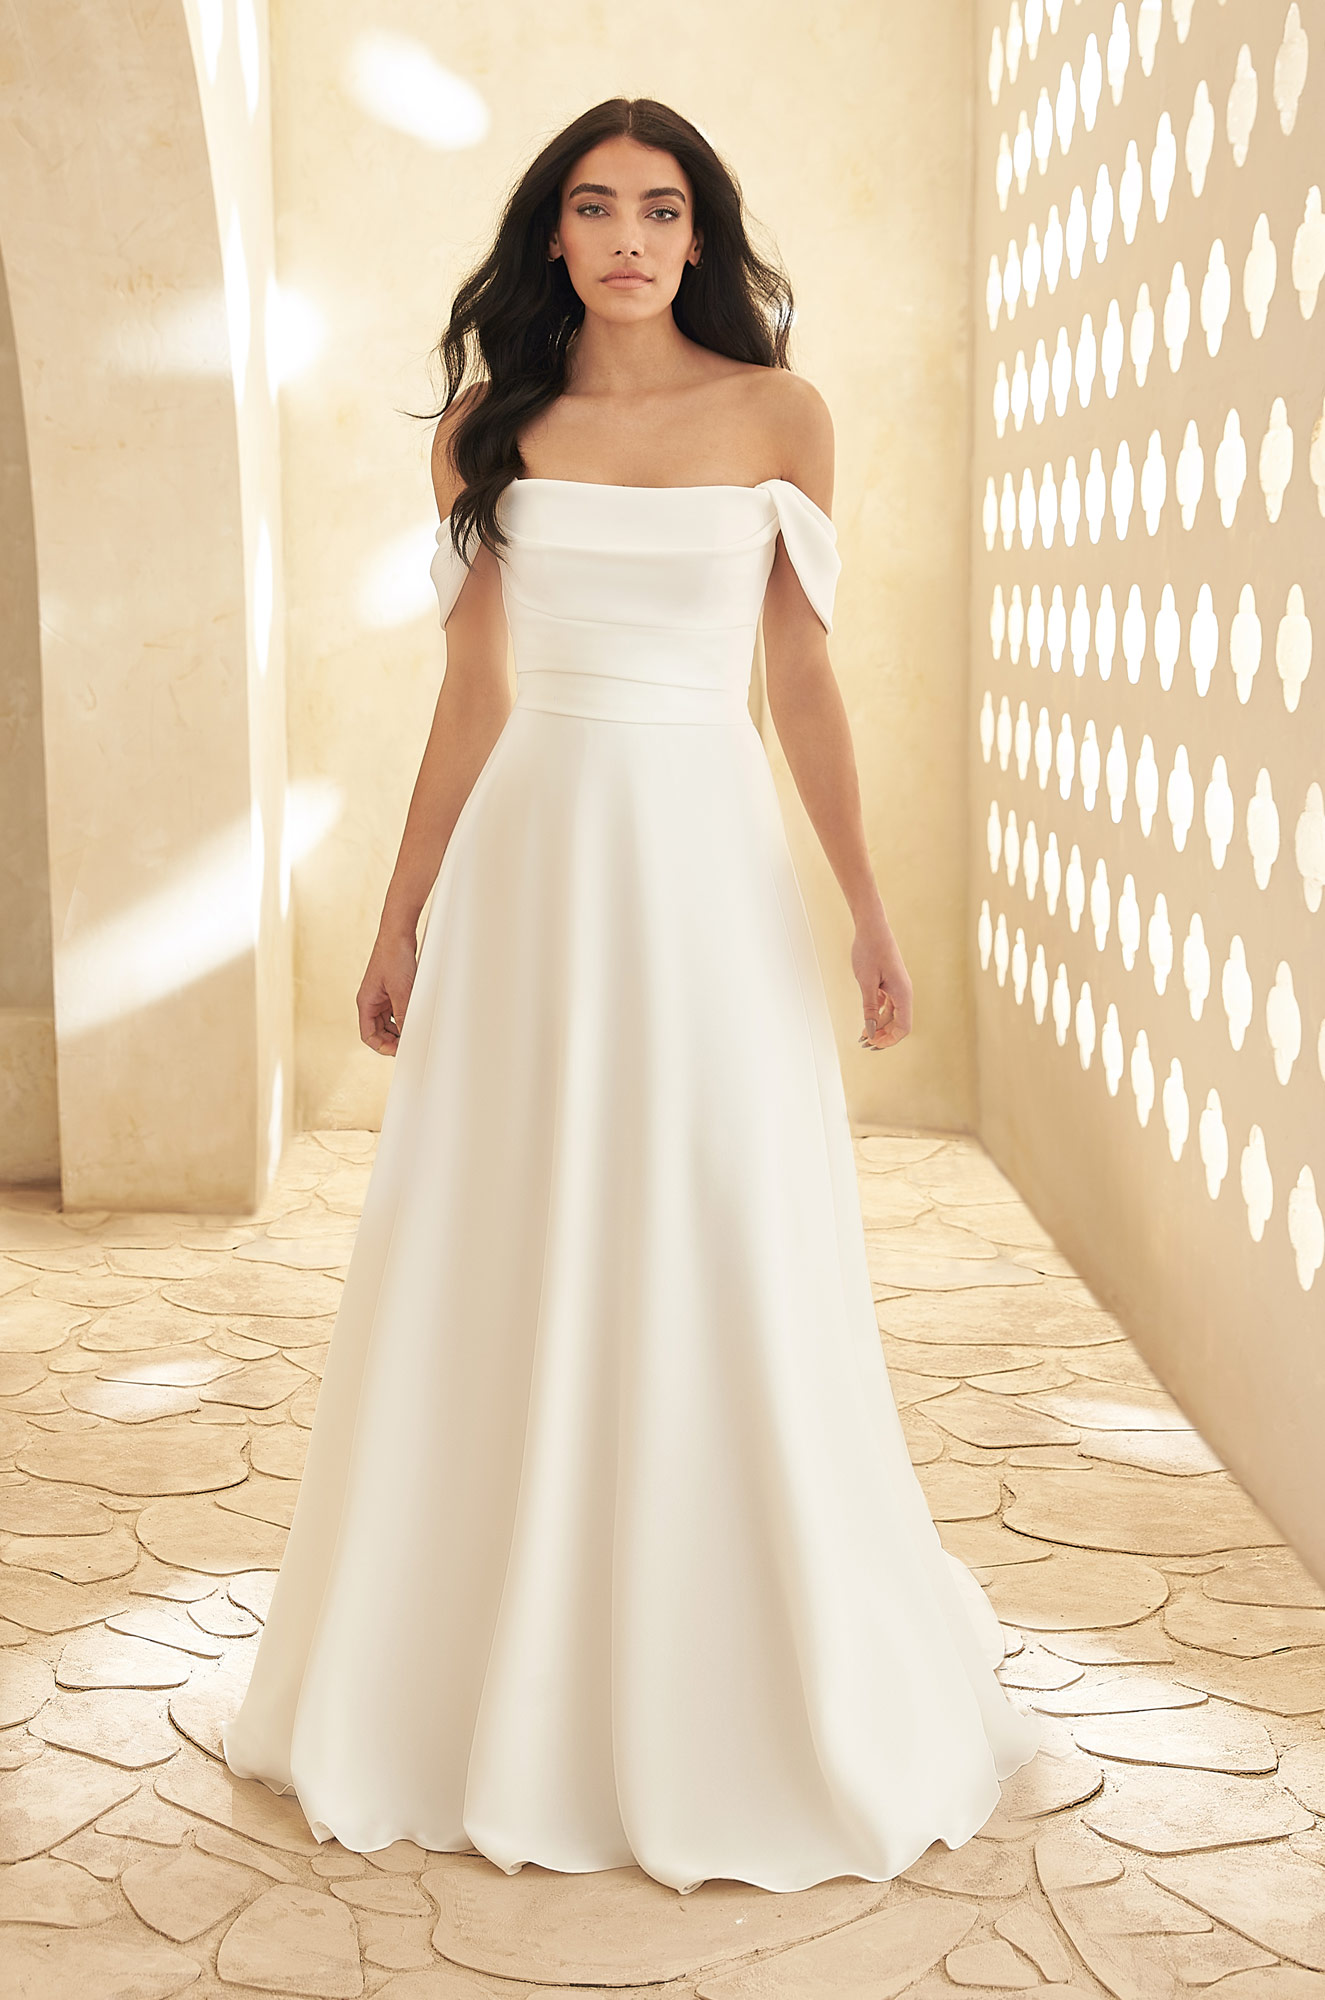 Shapewear suggestions for my crepe wedding dress? Looking for